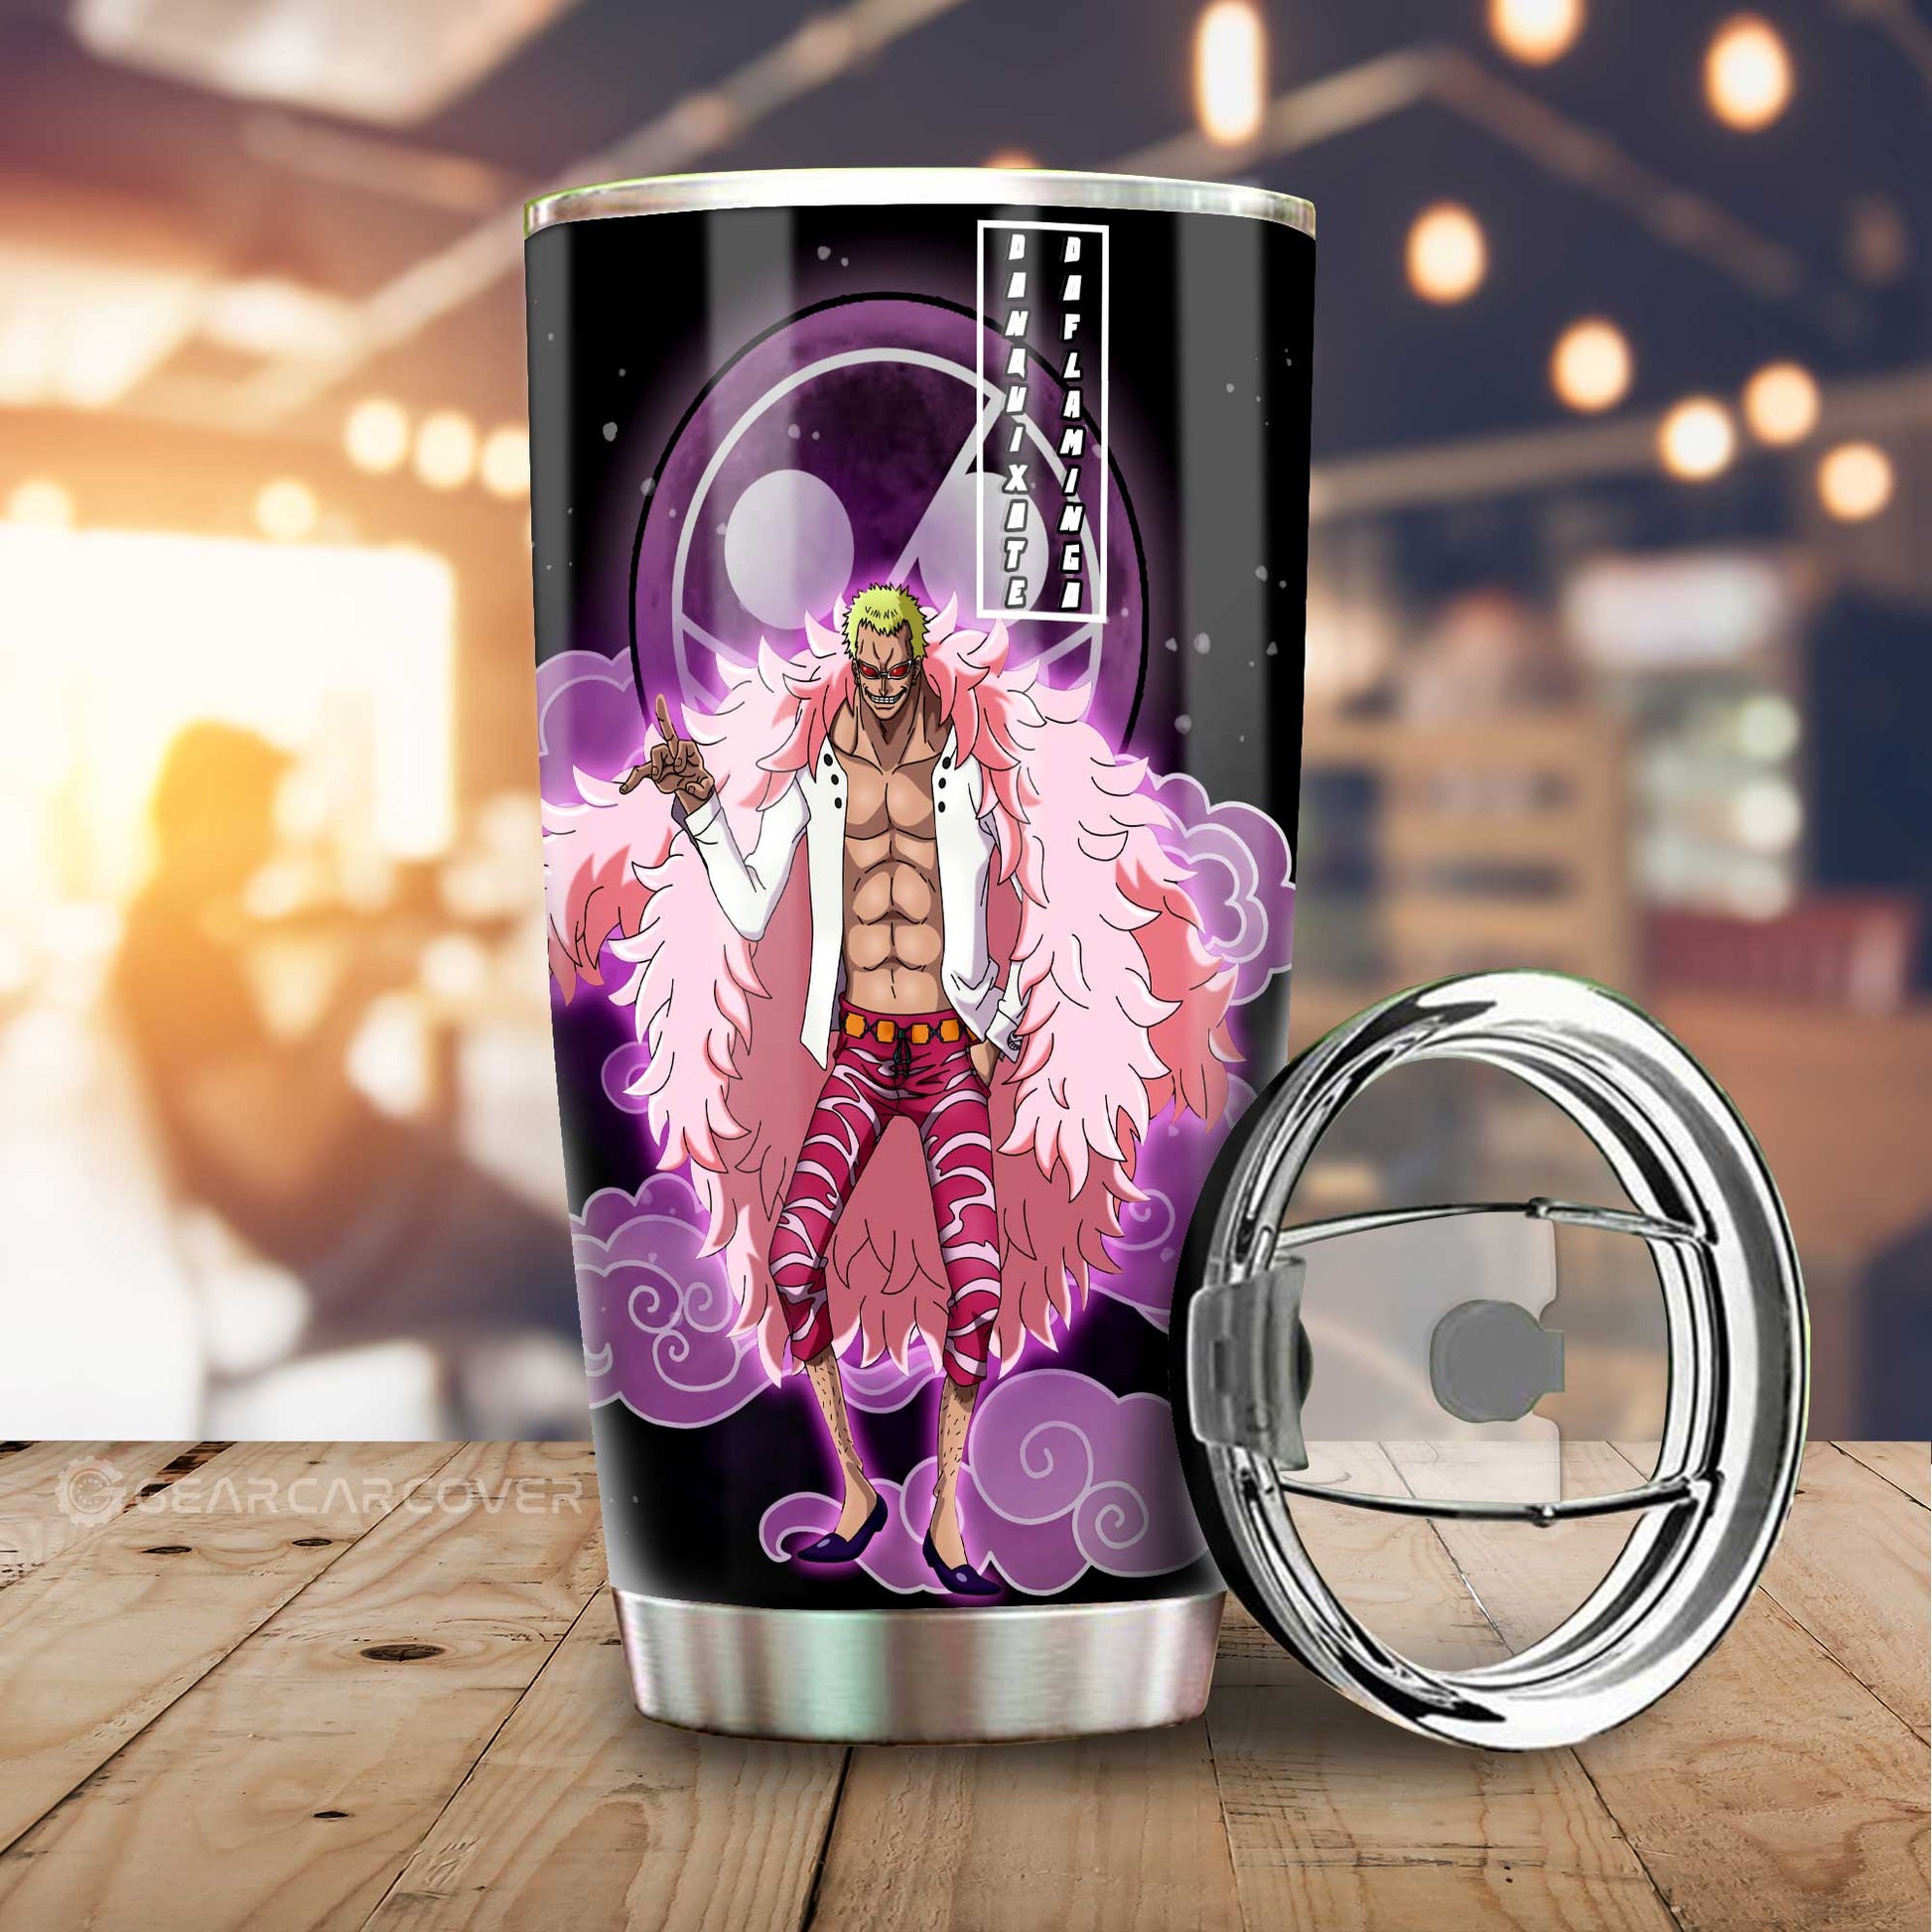 Donquixote Doflamingo Tumbler Cup Custom One Piece Anime Car Accessories For Anime Fans - Gearcarcover - 1